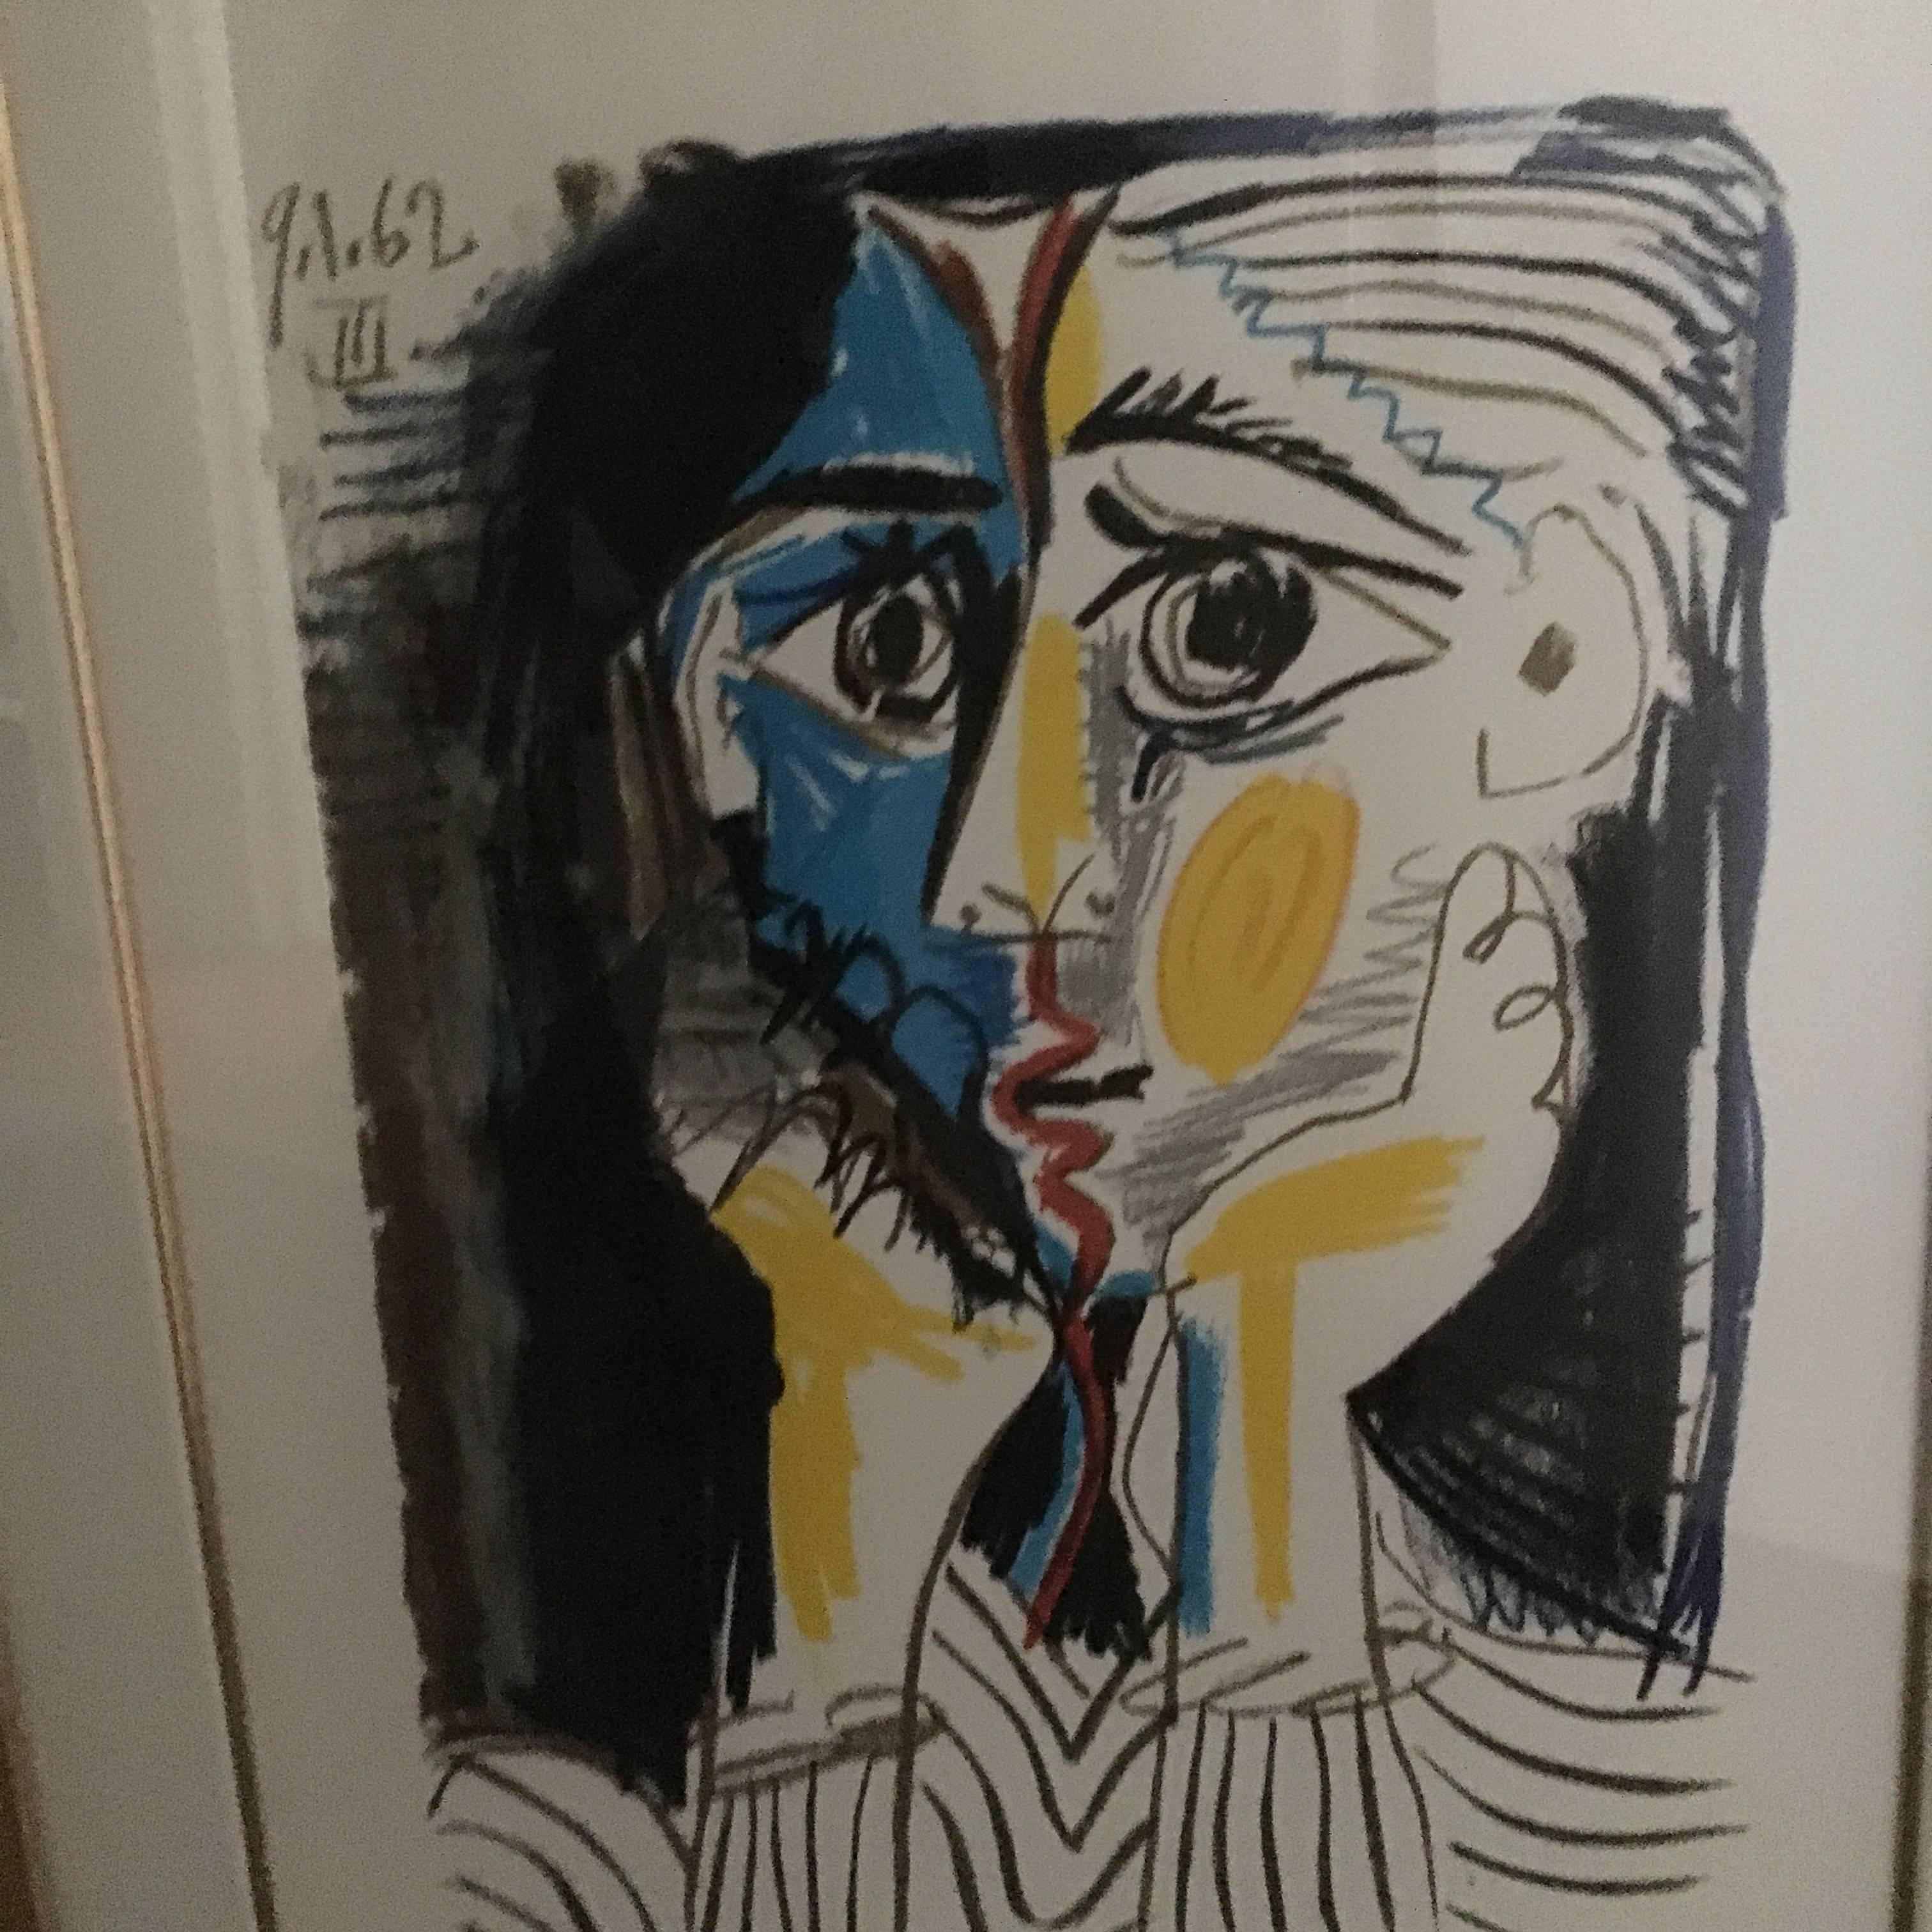 Picasso lithograph signed Marina Picasso, gilded wooden frame.

In 1962, at the height of Pablo Ruiz Picasso's career, he produced a notebook of images that demonstrate the greatness of his talent. The images in the notebook were never published,